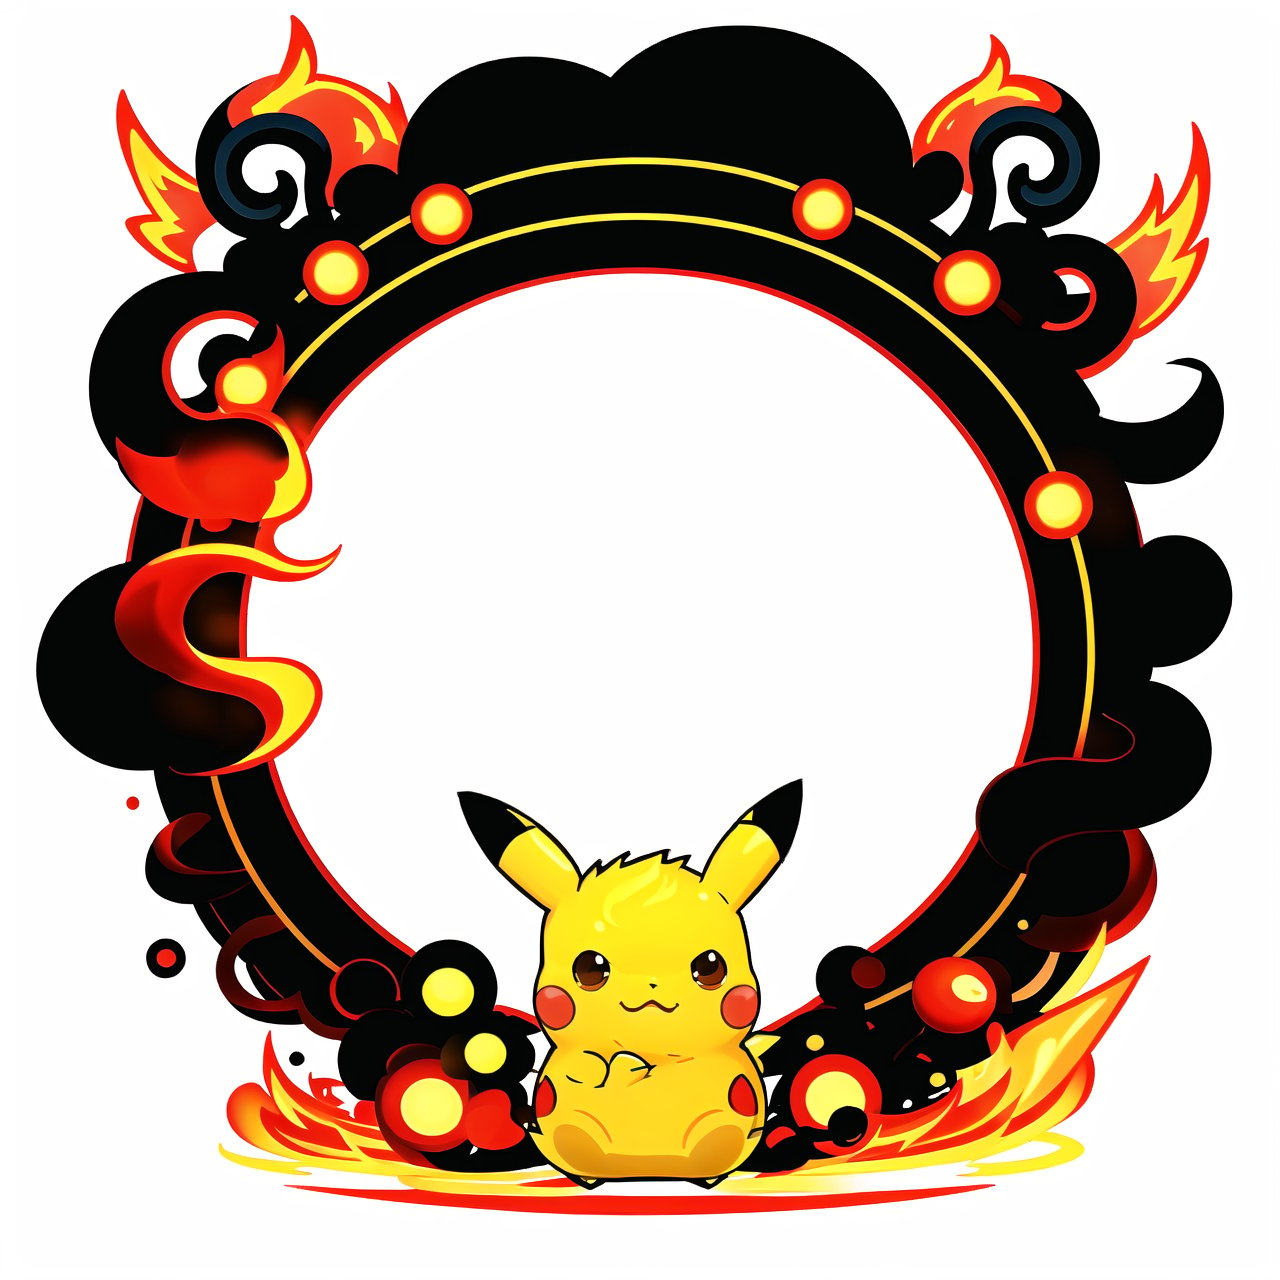 circle rounded avatar frame, in flame, electric, lightnig, ultra detailed, intricate, white background, simple background,circleframe, pikachu style